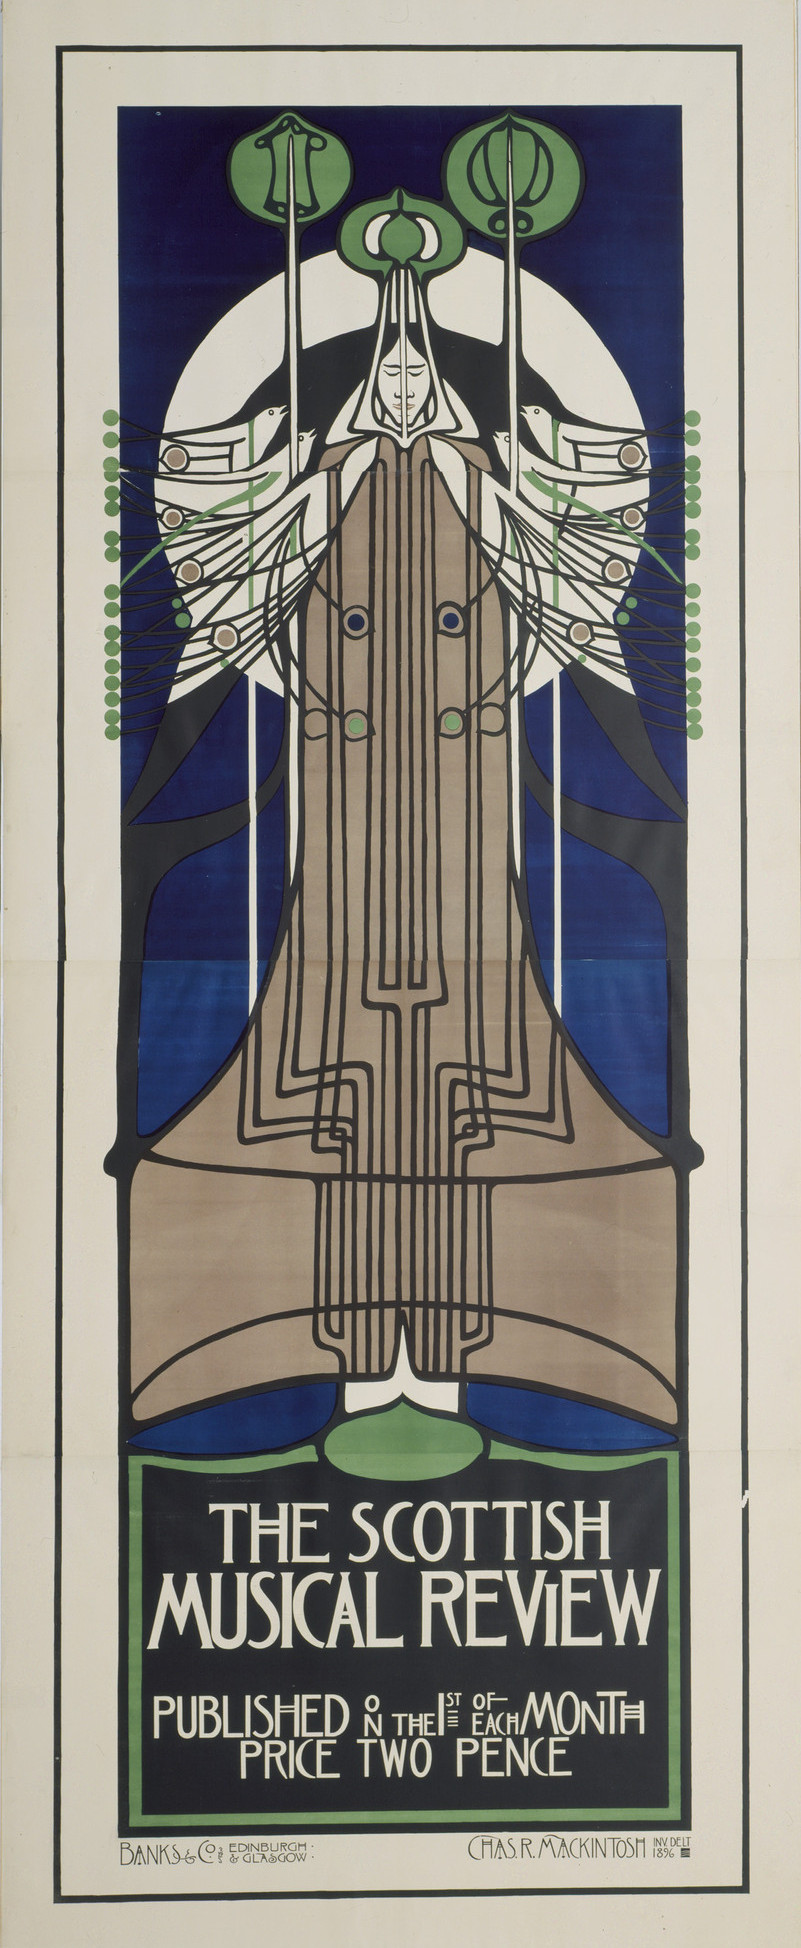 Charles Rennie Mackintosh. The Scottish Musical Review (Poster for a magazine), 1896